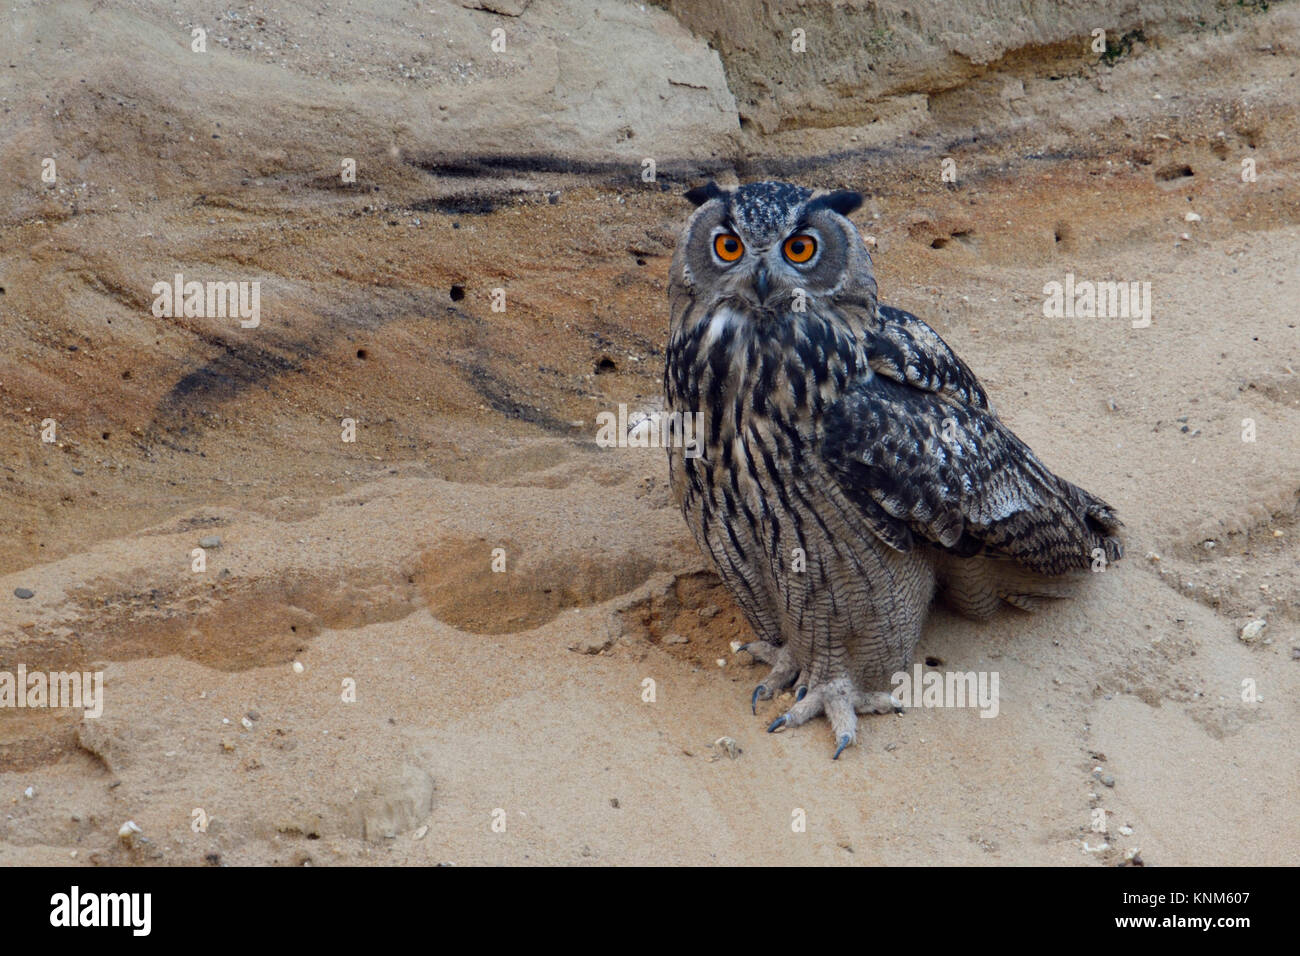 Eurasian Eagle Owl / Uhu ( Bubo bubo ) young bird, sitting in the slope of a sand pit, bright orange eyes wide open, look cute, wildlife, Europe. Stock Photo